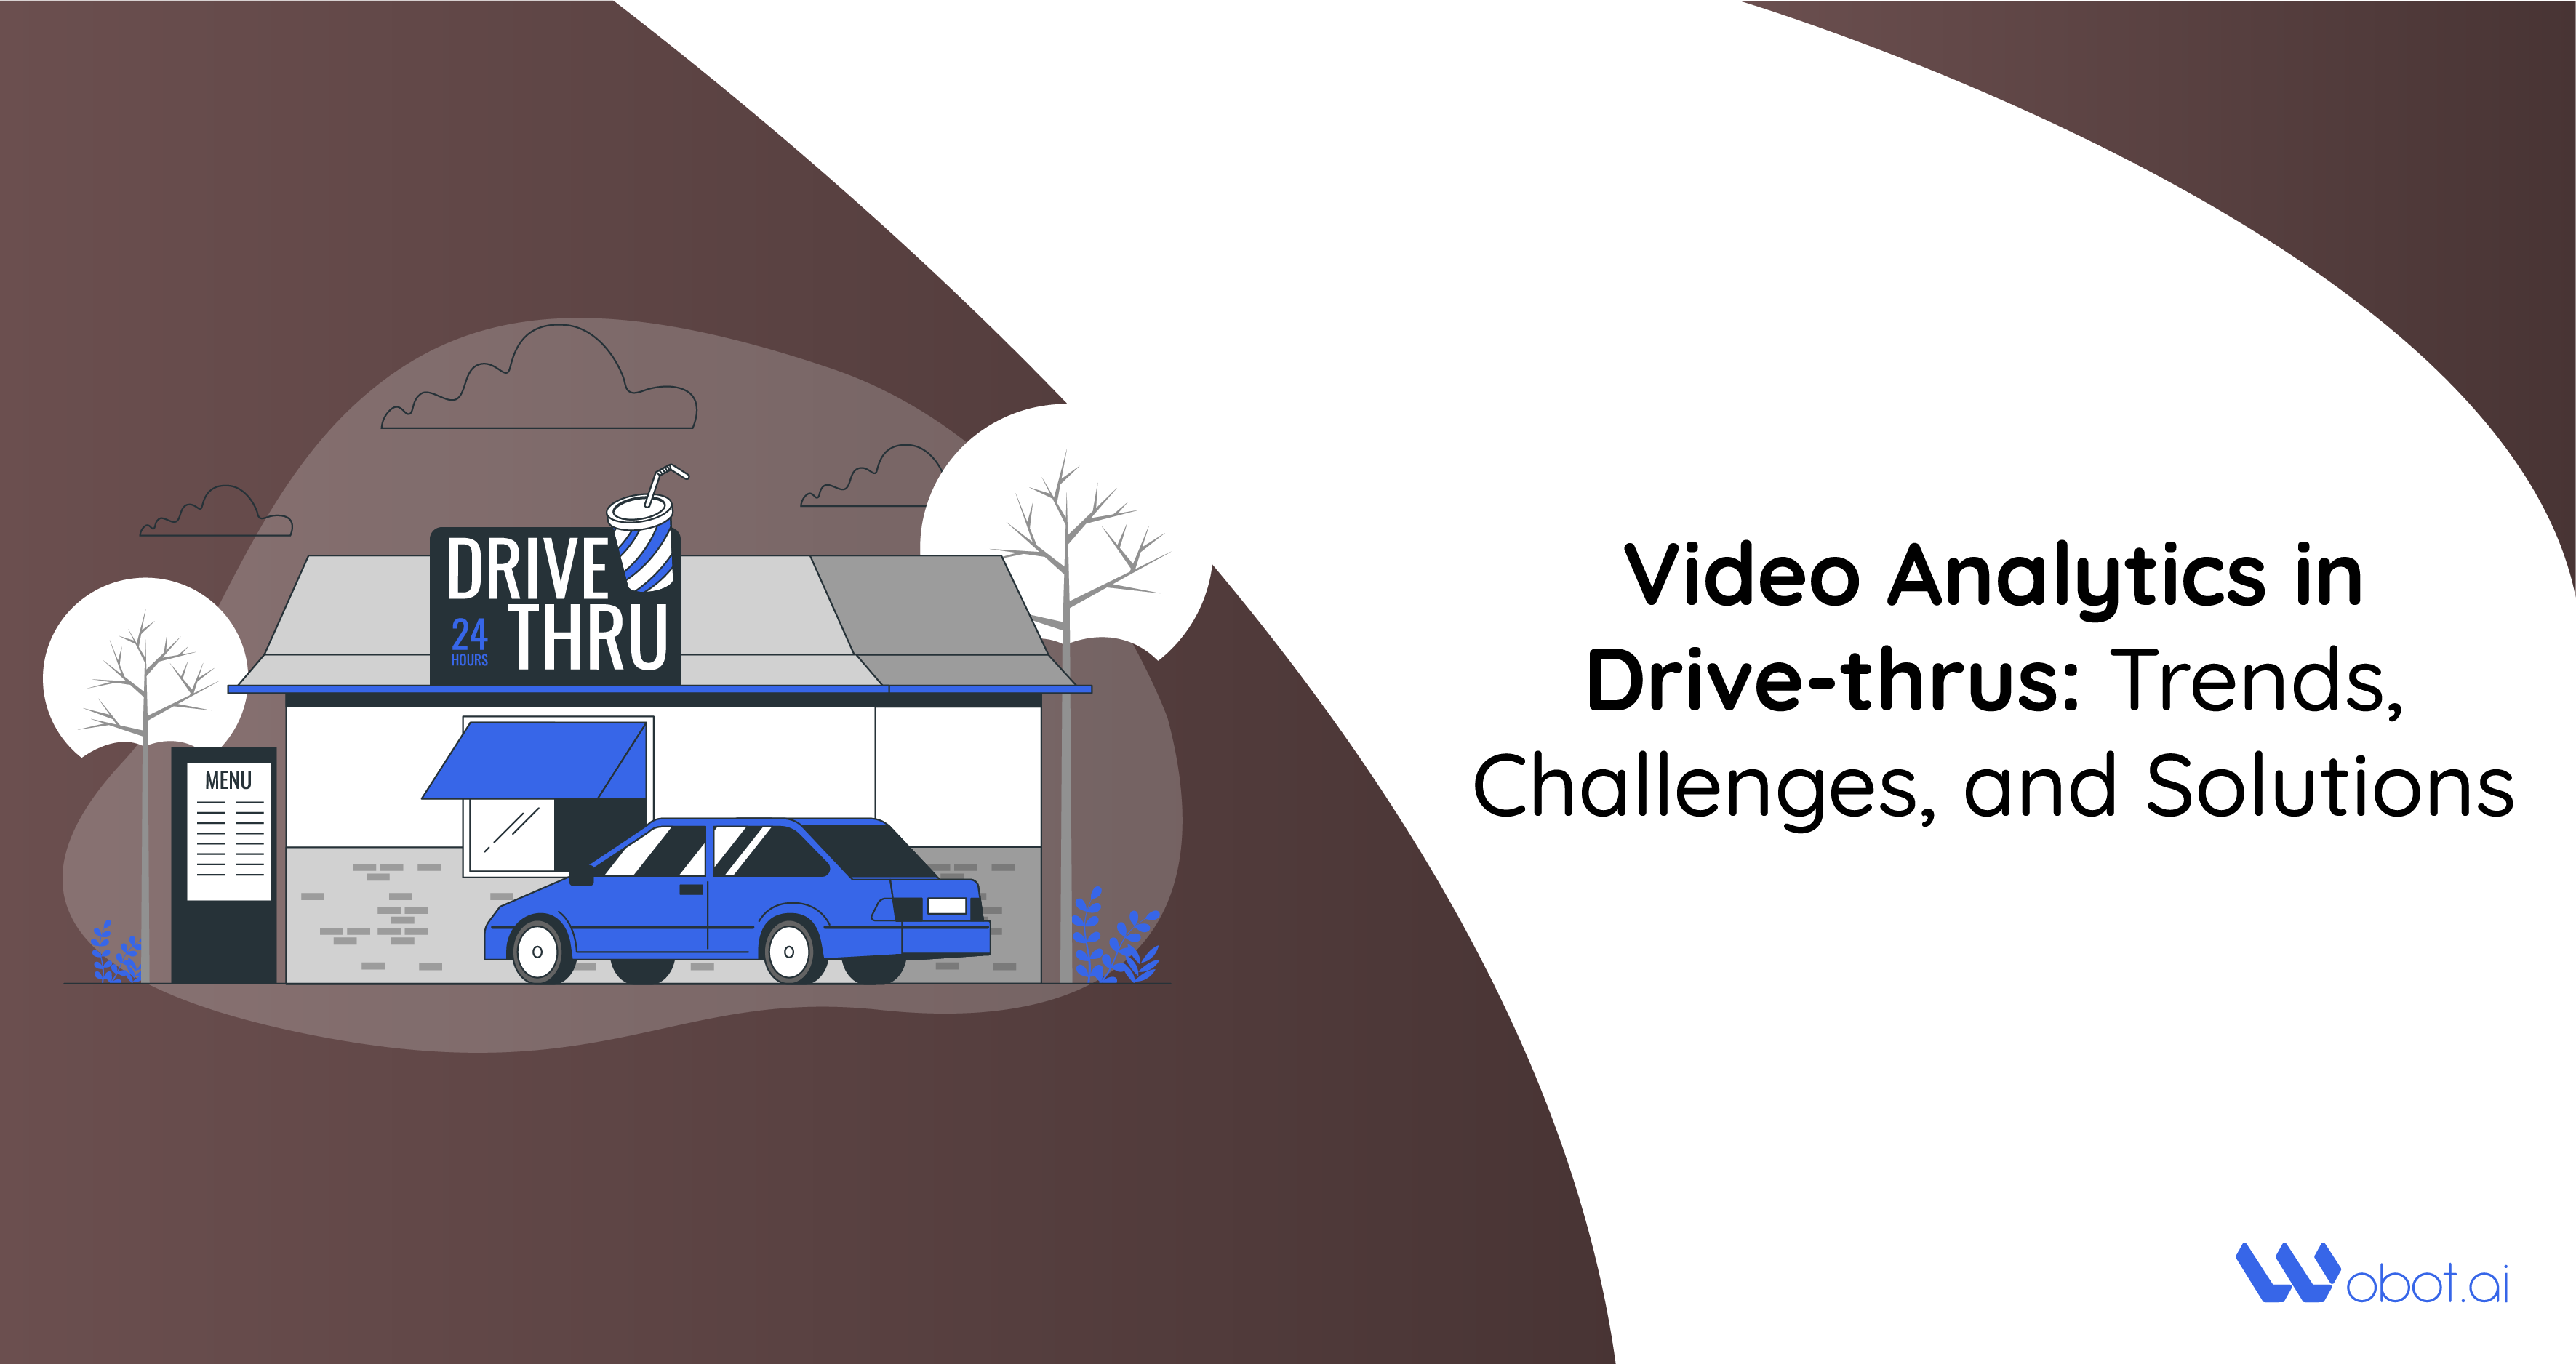 Video Analytics in Drive-thrus: Trends, Challenges, and Solutions